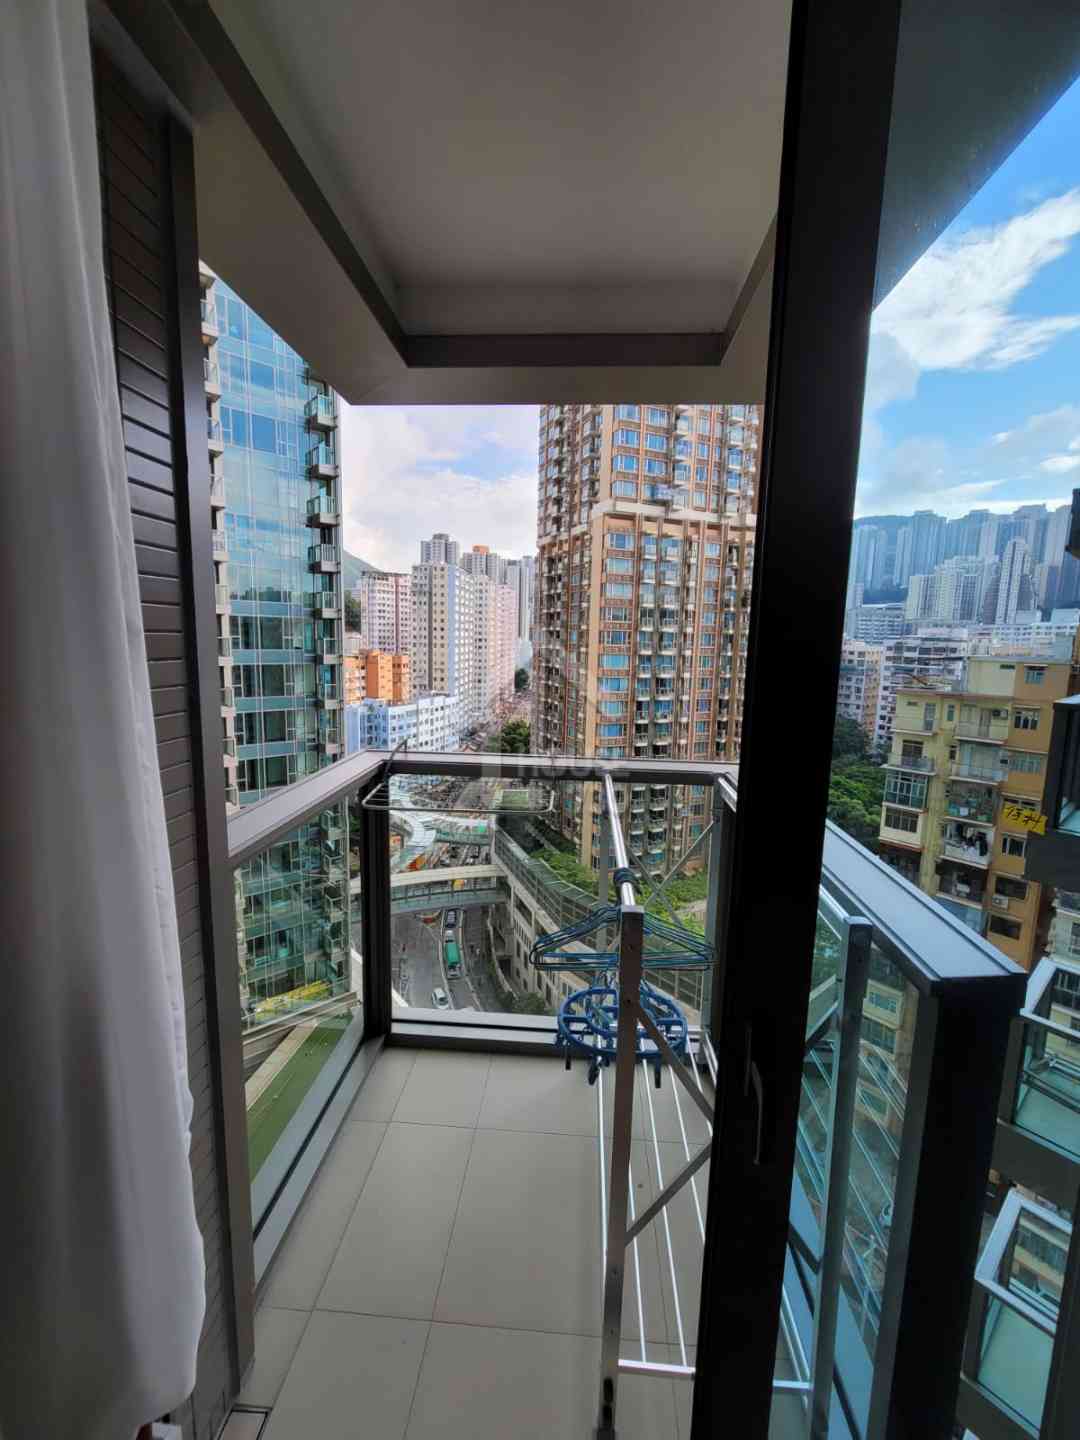 Kwun Tong GRAND CENTRAL Middle Floor Outdoor View House730-5218502